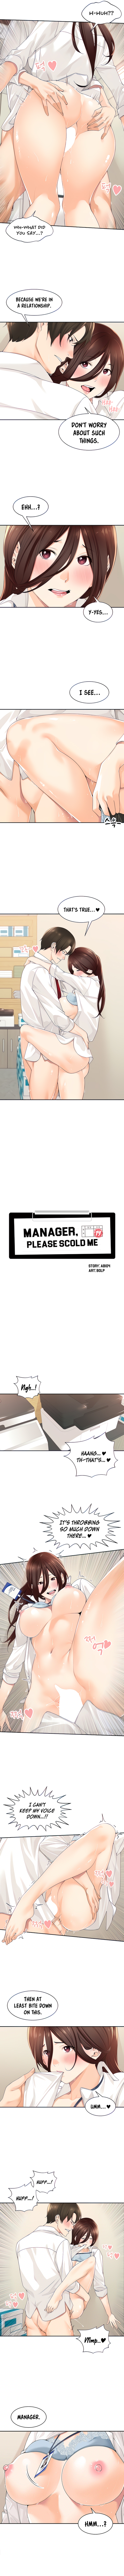 Manager, Please Scold Me image